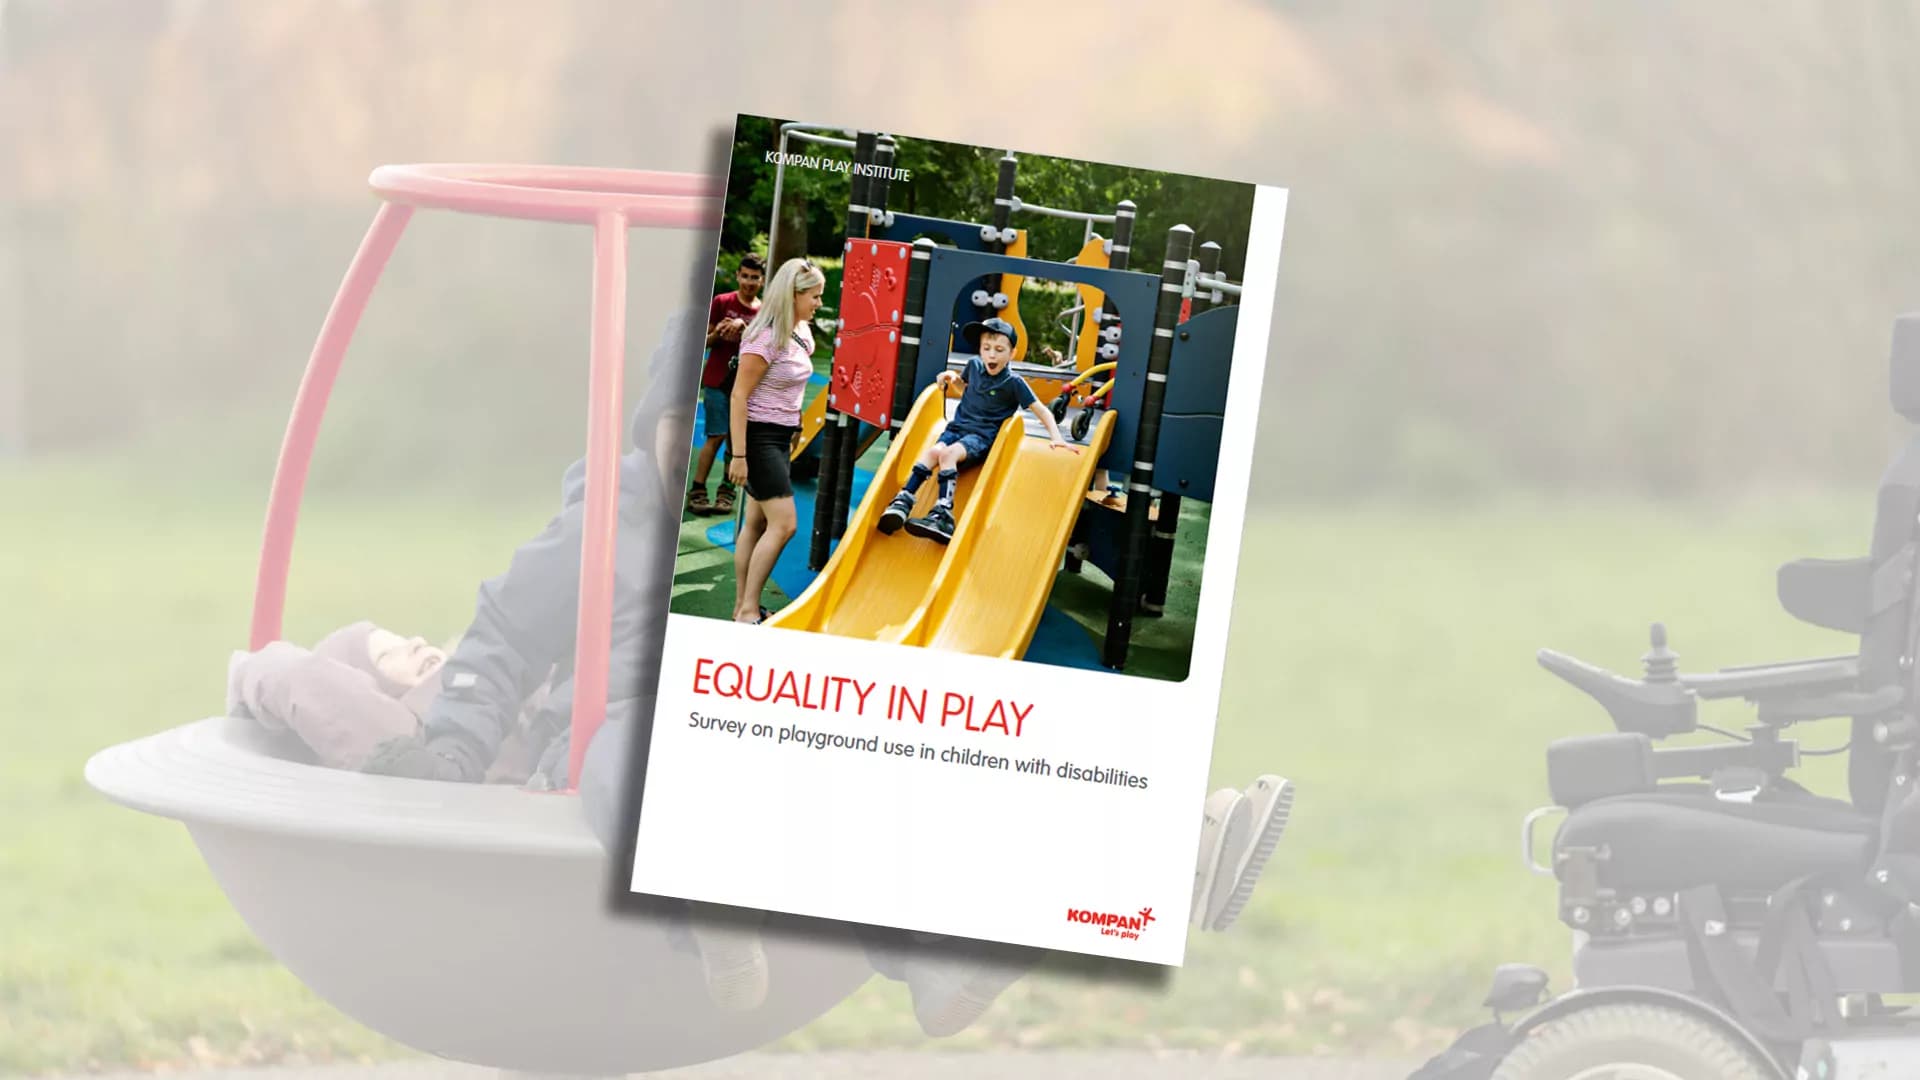 Children with disabilities have less than half the chance of accessing playgrounds